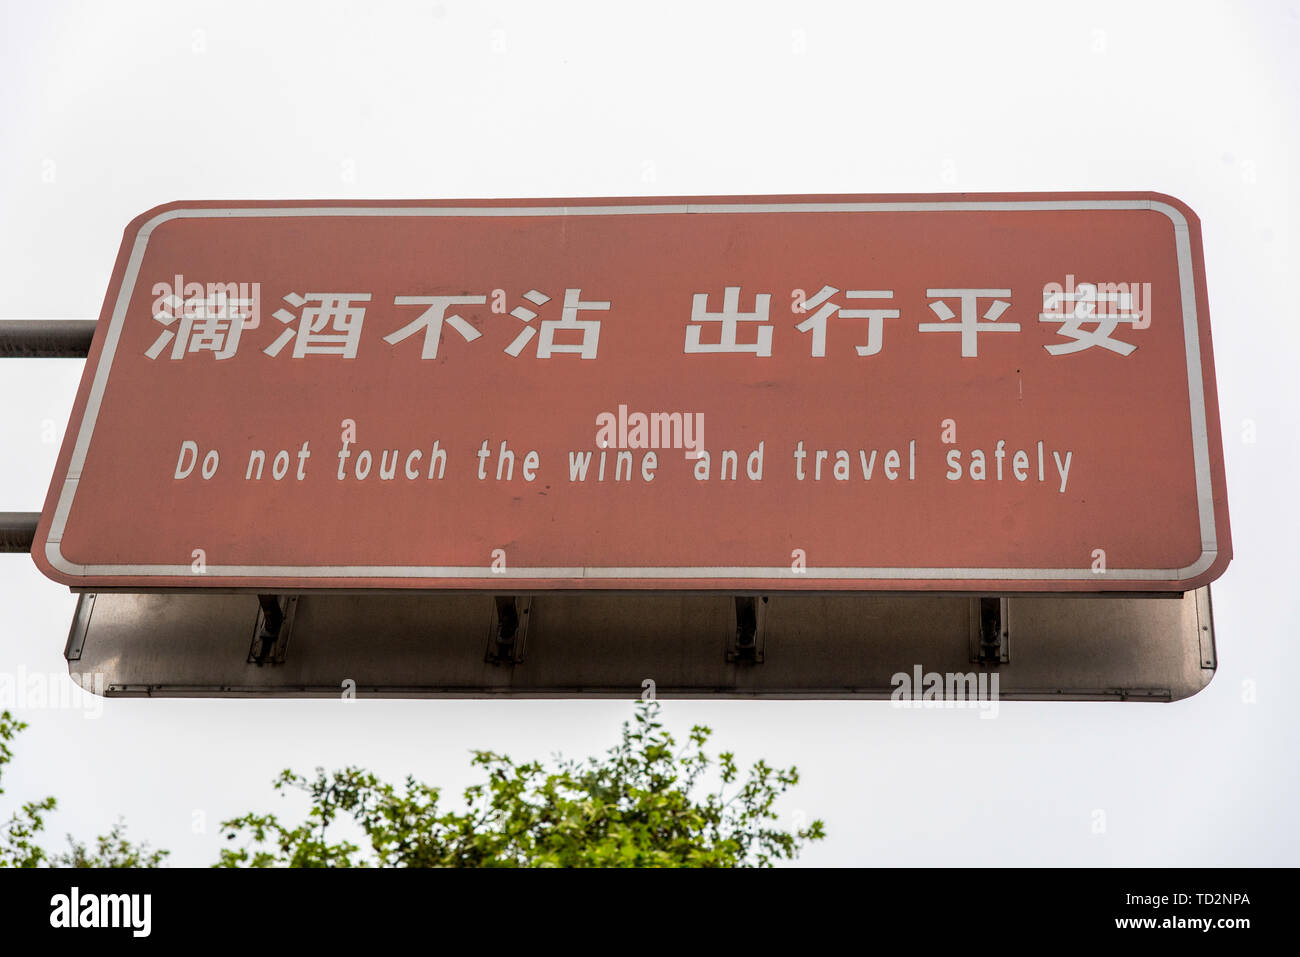 Do not Touch the Wine and travel safely a sign in Chinese and English Photographed in Dujiangyan city, Sichuan Province, China Stock Photo